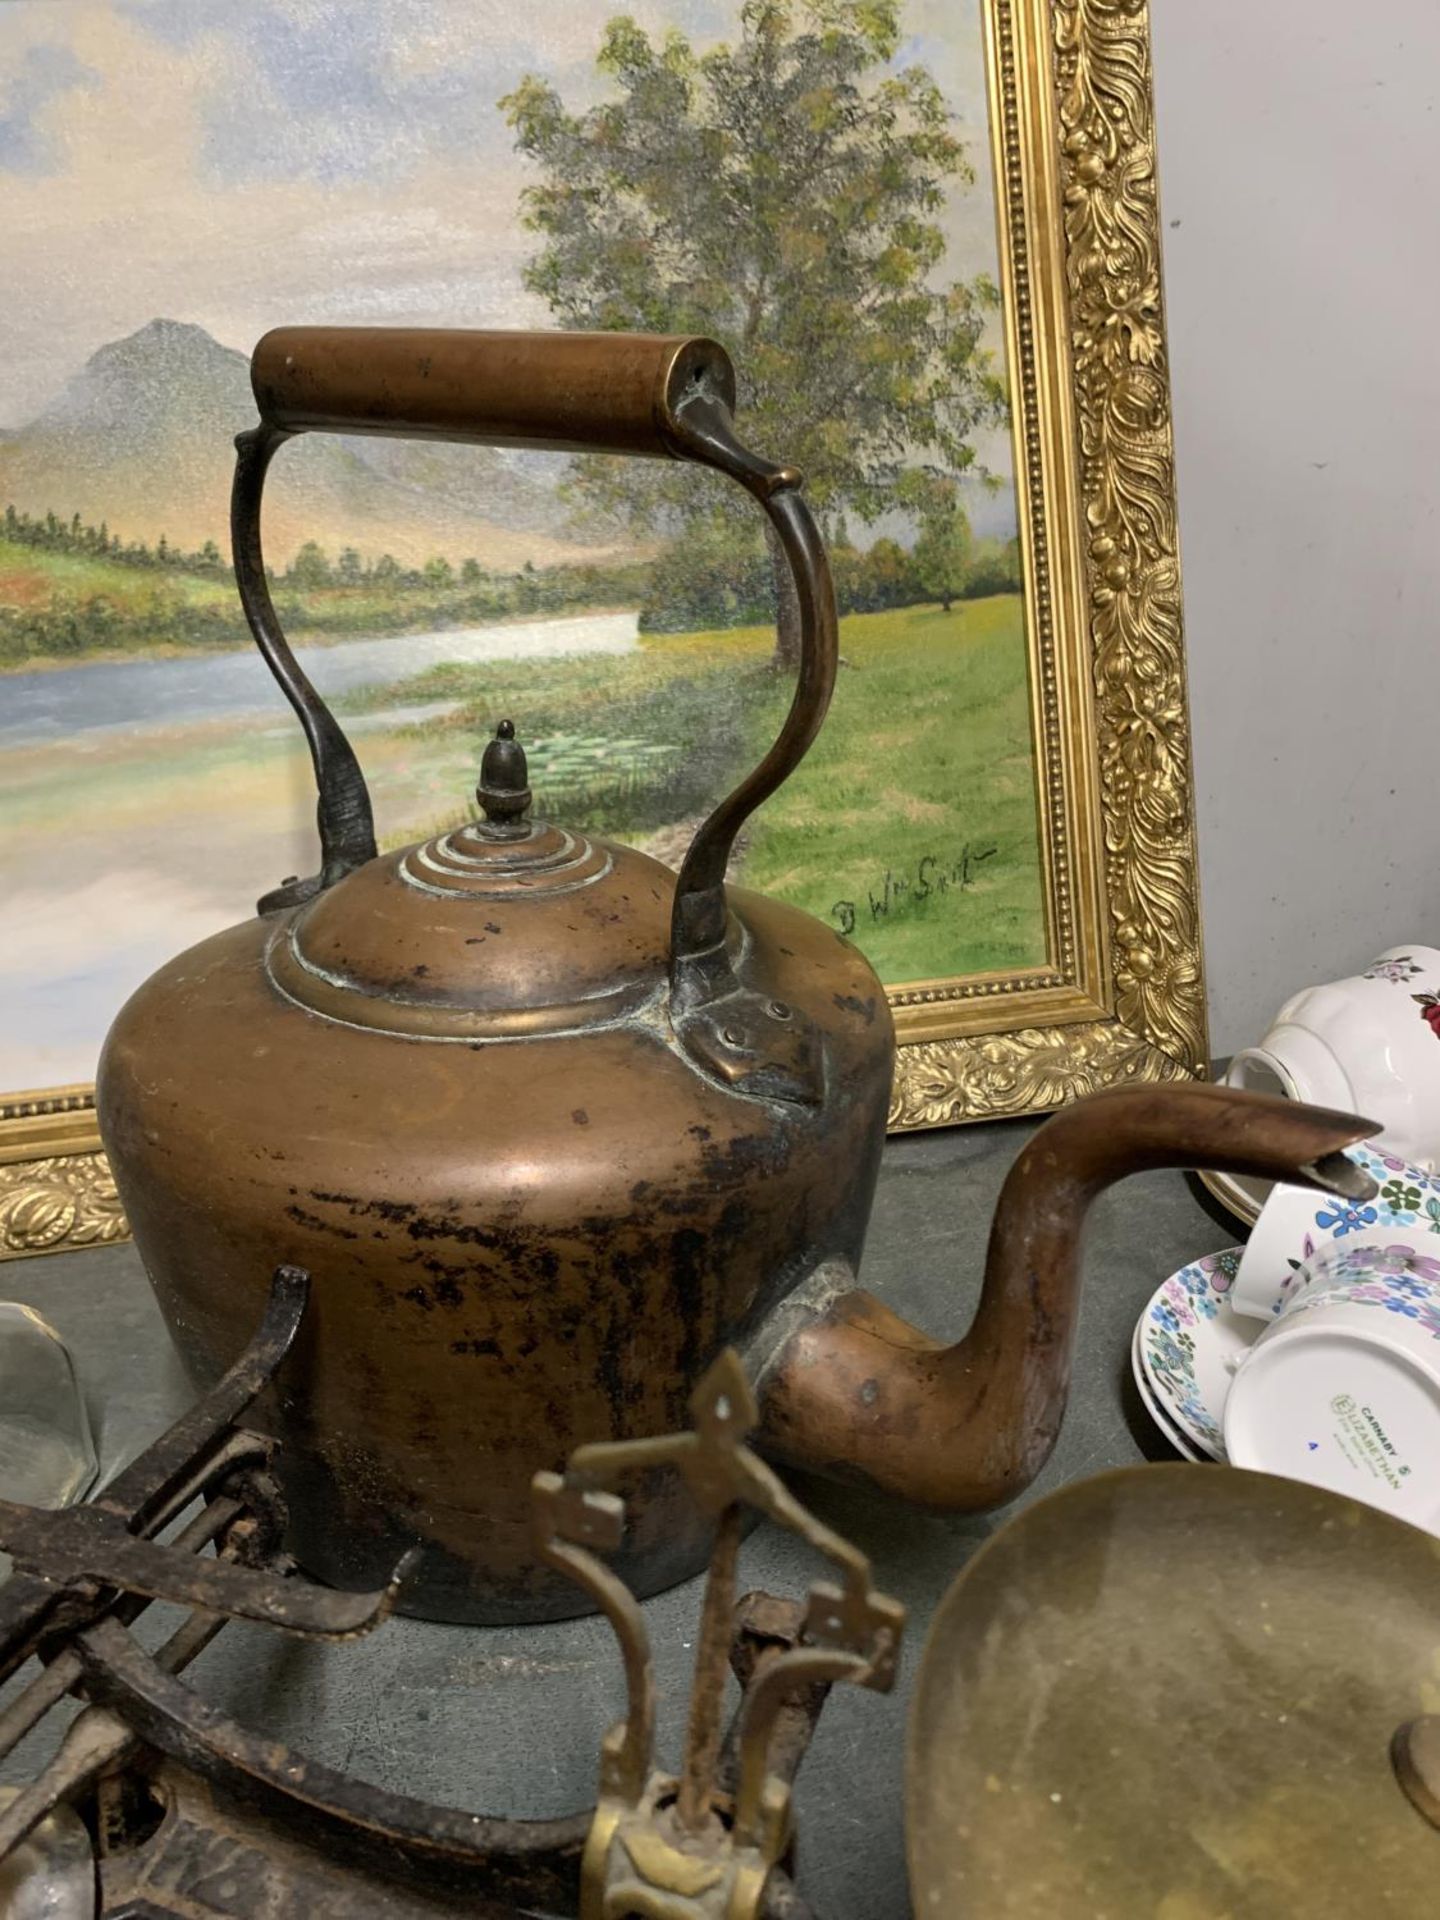 A LARGE MIXED VINTAGE LOT TO INCLUDE A COPPER KETTLE, SCALES, DOORSTOP, ANIMAL FIGURES,A GLASS - Image 4 of 4